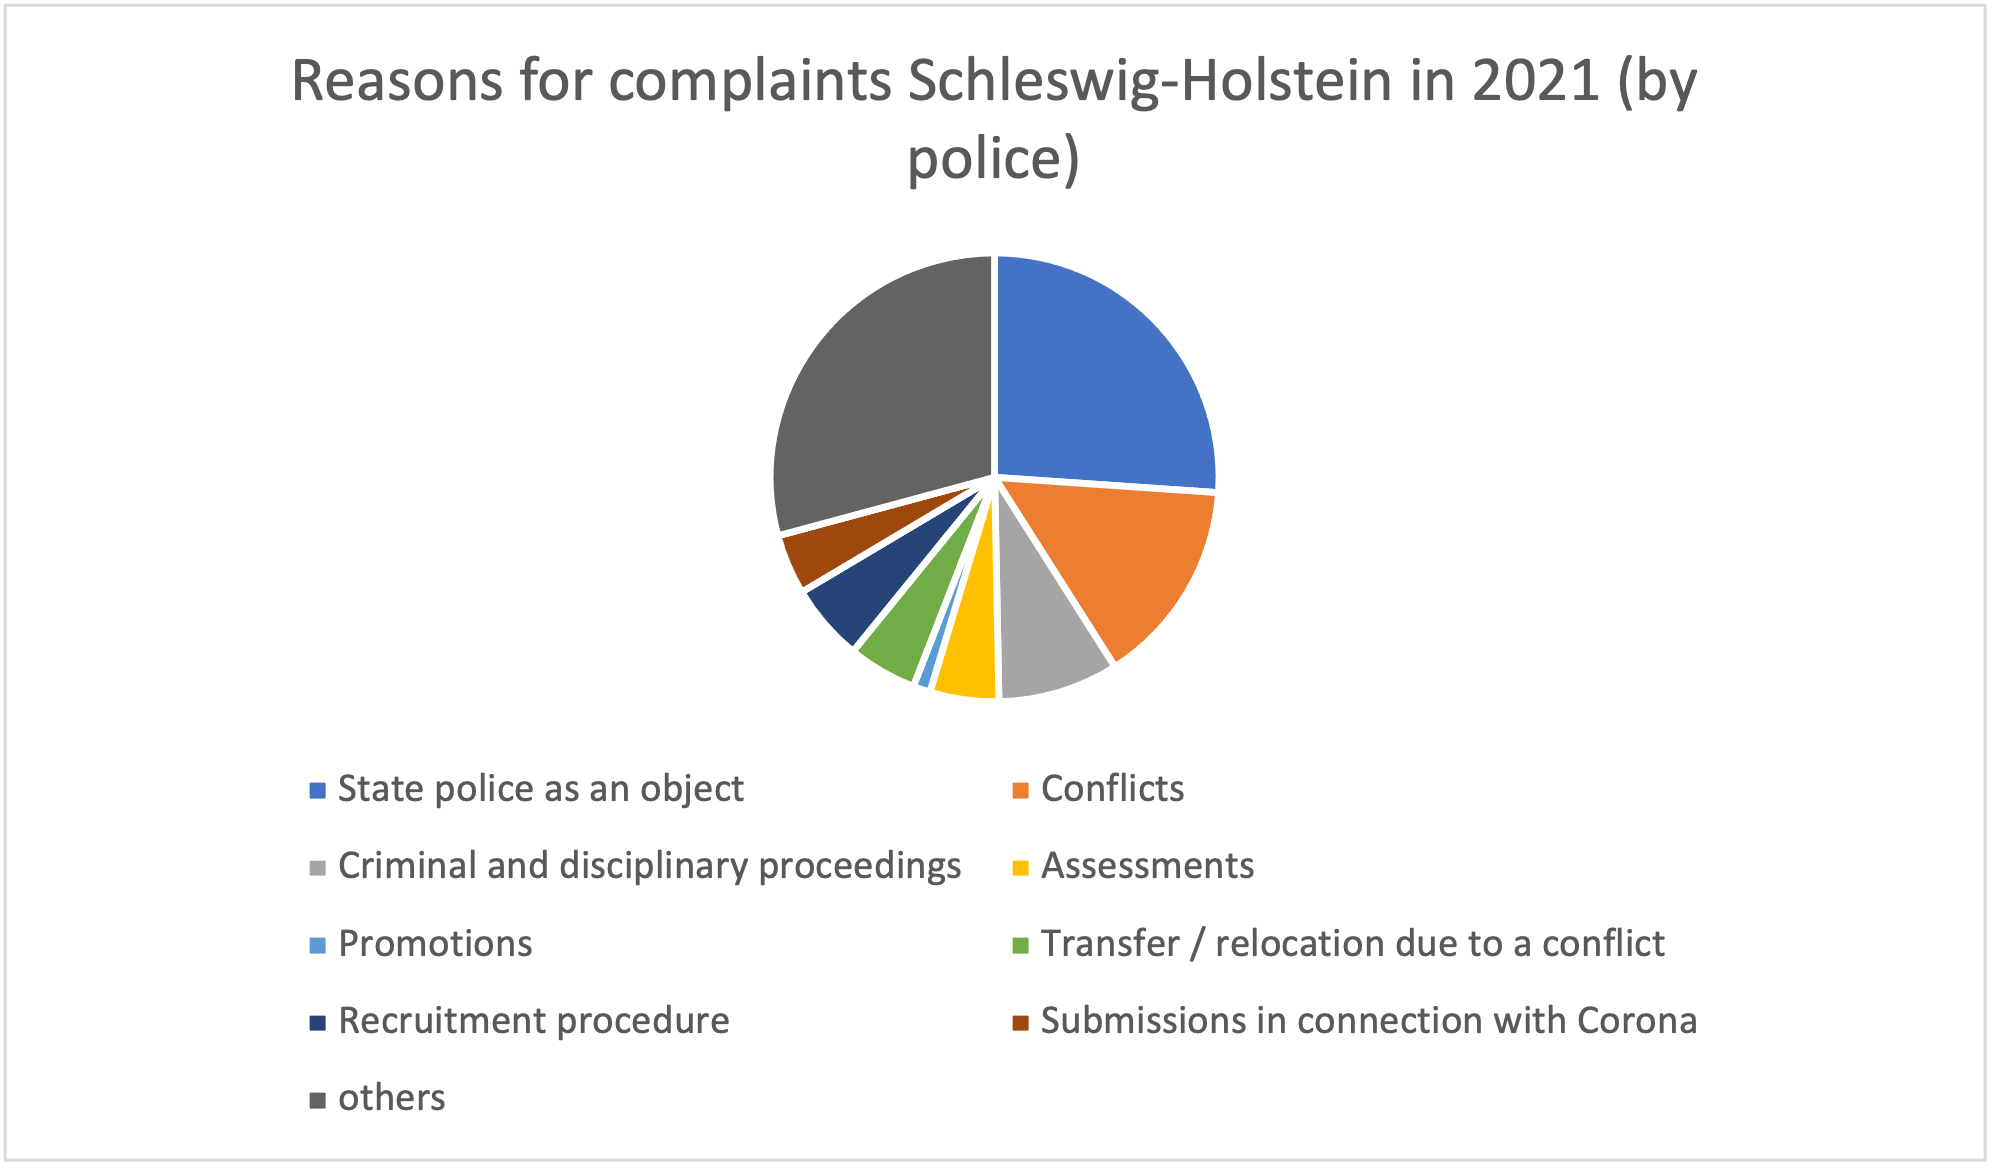 Germany InfoGraphic 5 - Reasons for complaints in Schleswig-Holstein by police in 2021